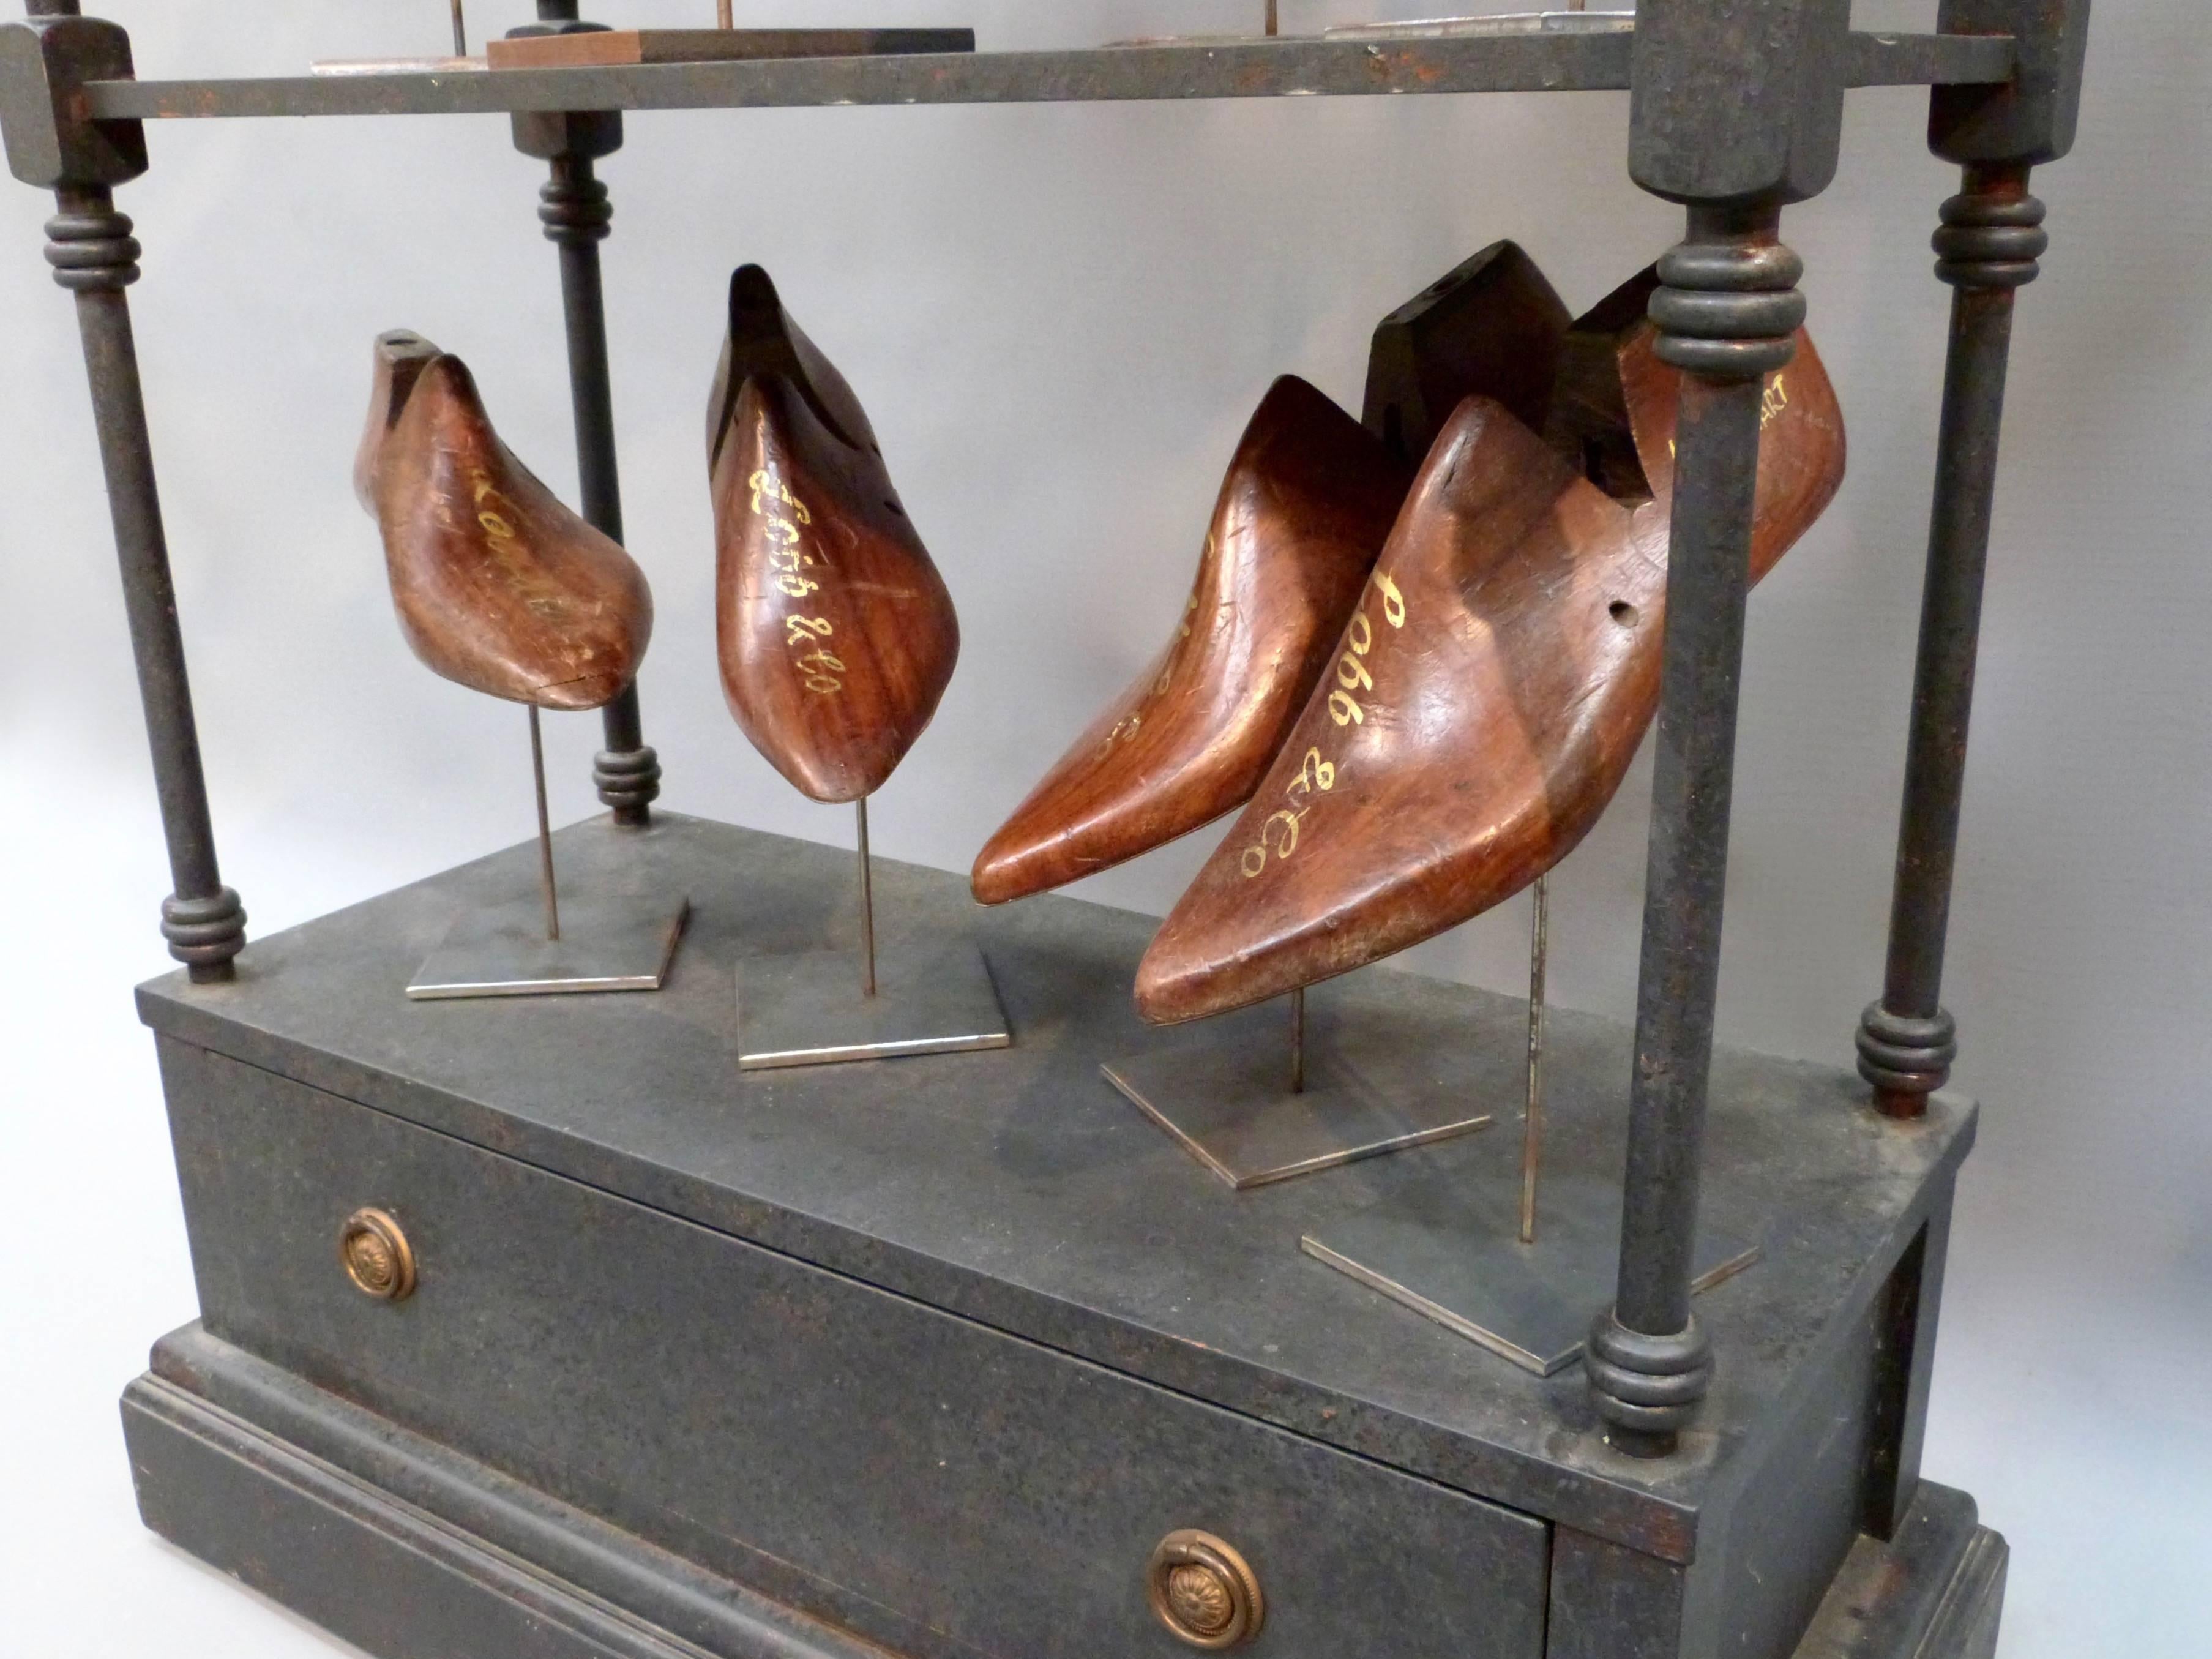 A collection of eight pairs and a single Lobb & Co. shoe moulds on a display stand.
In the middle of the 19th century, John Lobb, a farmer's son, crippled as the result of an accident, made his way on foot from Cornwall to London. He was